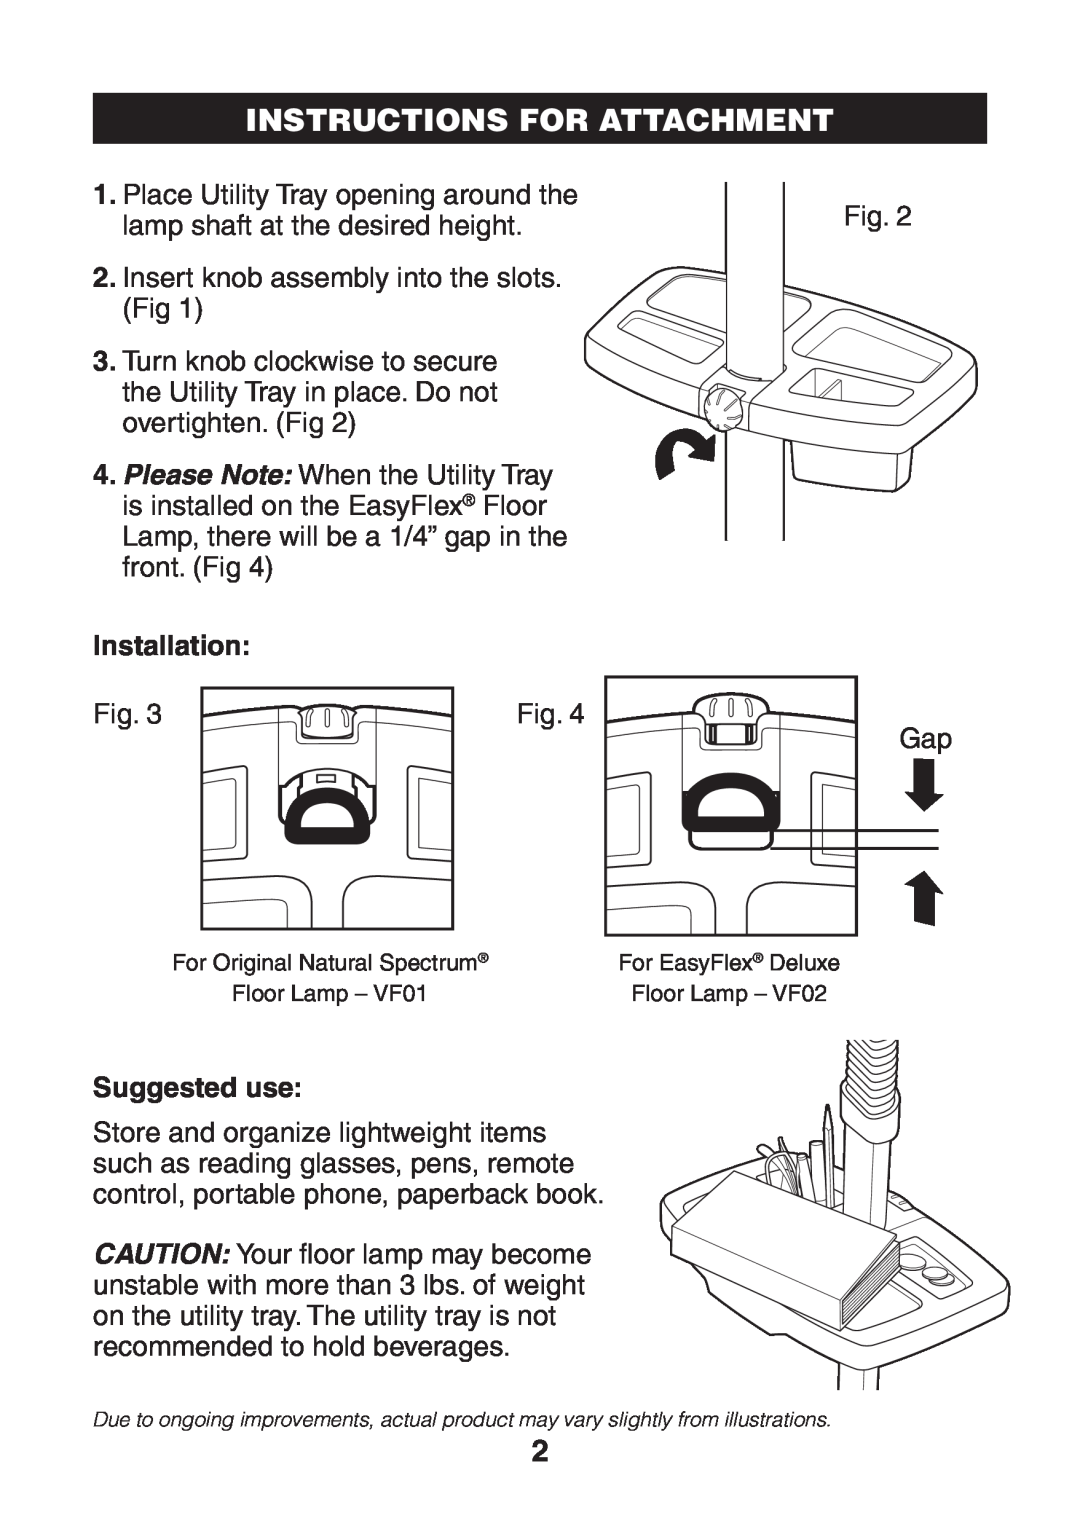 Verilux VL01 manual Instructions For Attachment, Installation, Suggested use 